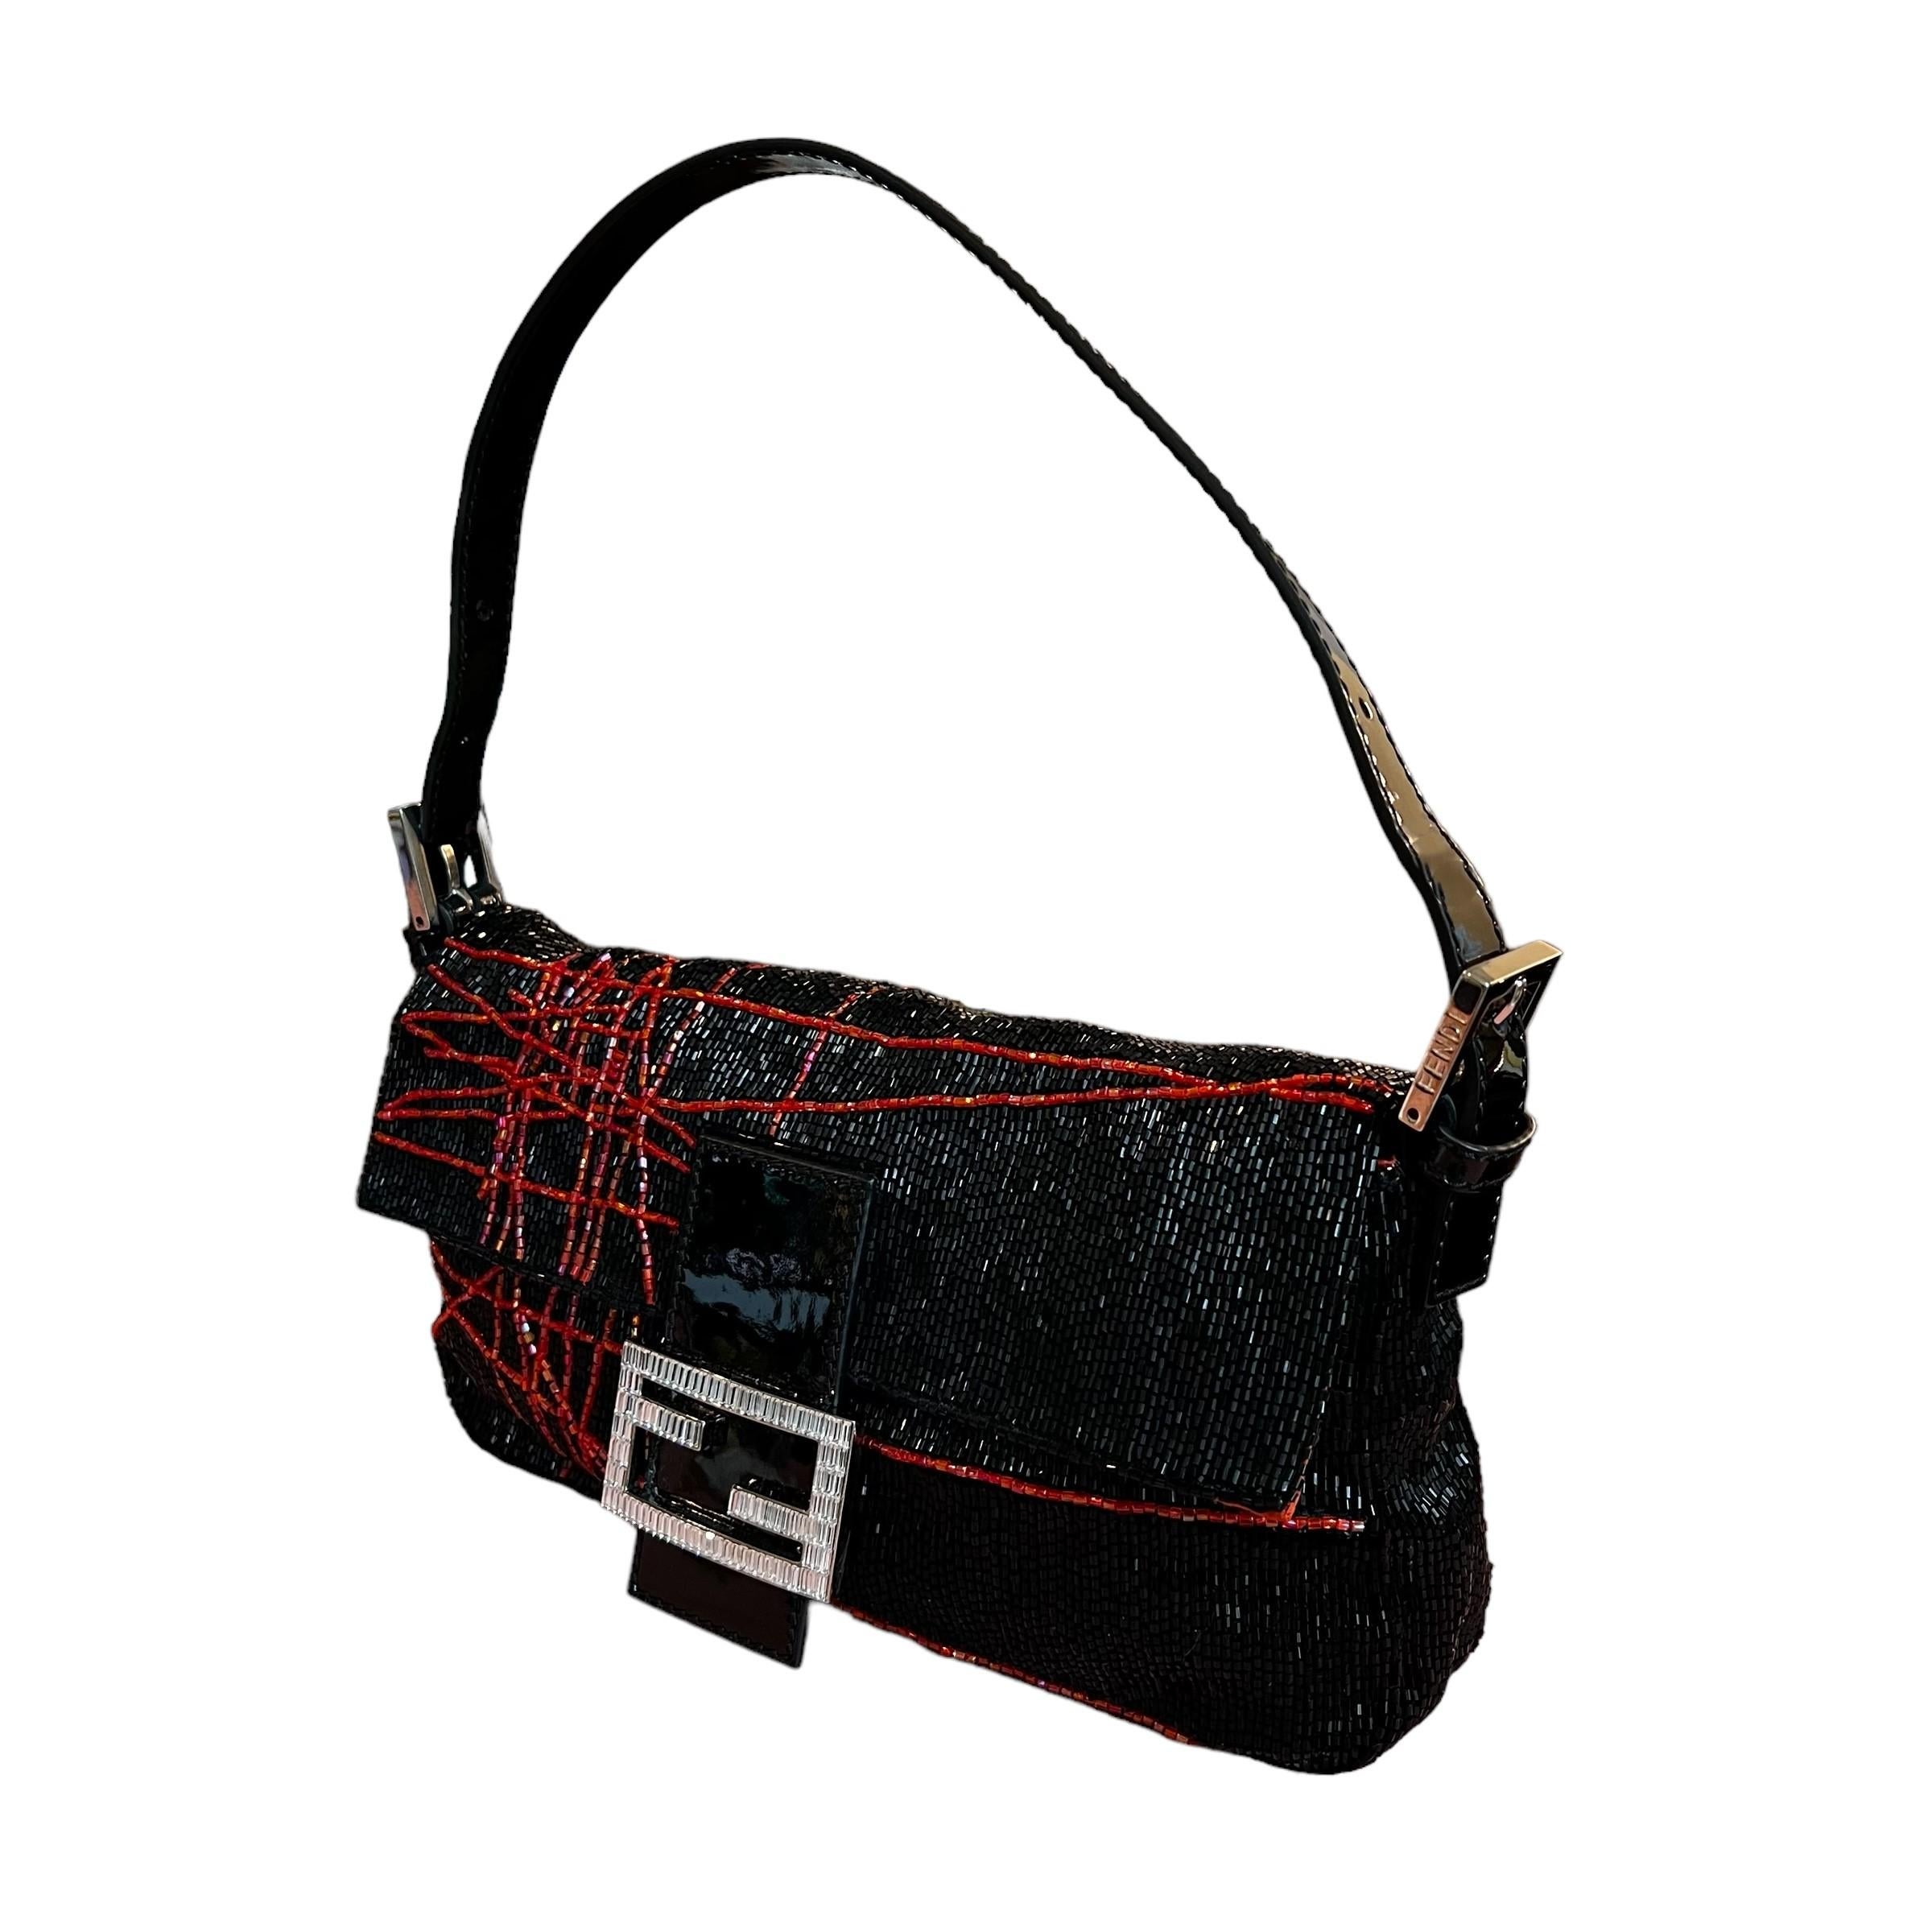 Rare Beaded Fendi Baguette Bag With Patent Leather & Swarovski Crystals For Sale 5